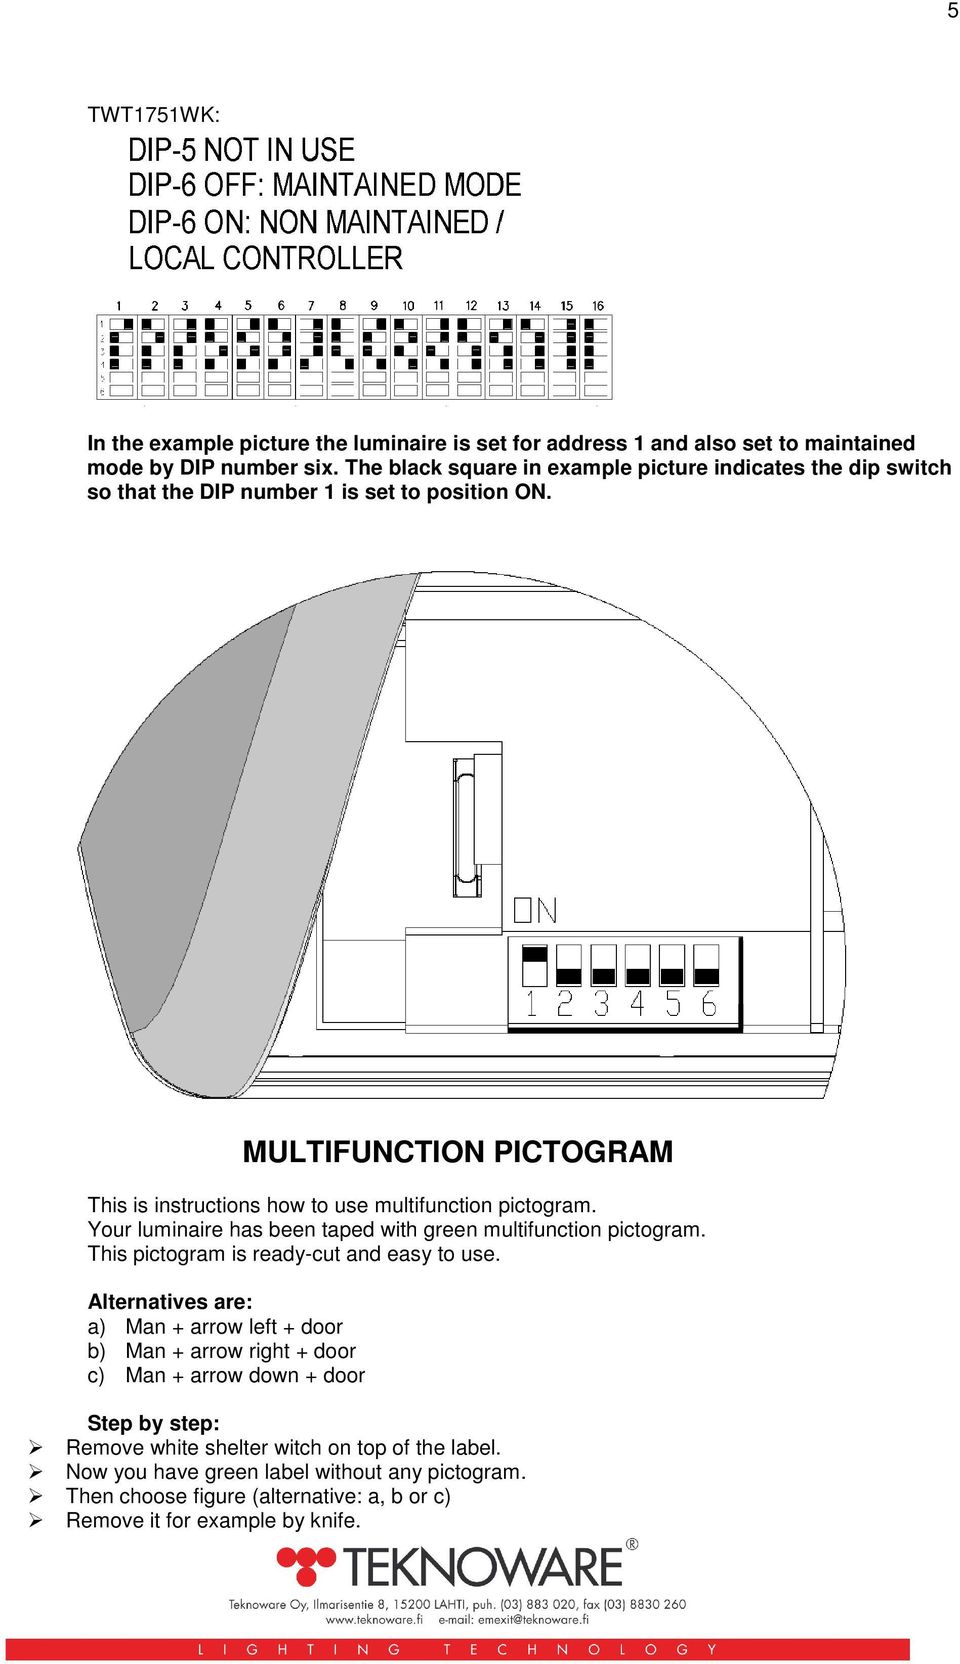 MULTIFUNCTION PICTOGRAM This is instructions how to use multifunction pictogram. Your luminaire has been taped with green multifunction pictogram.